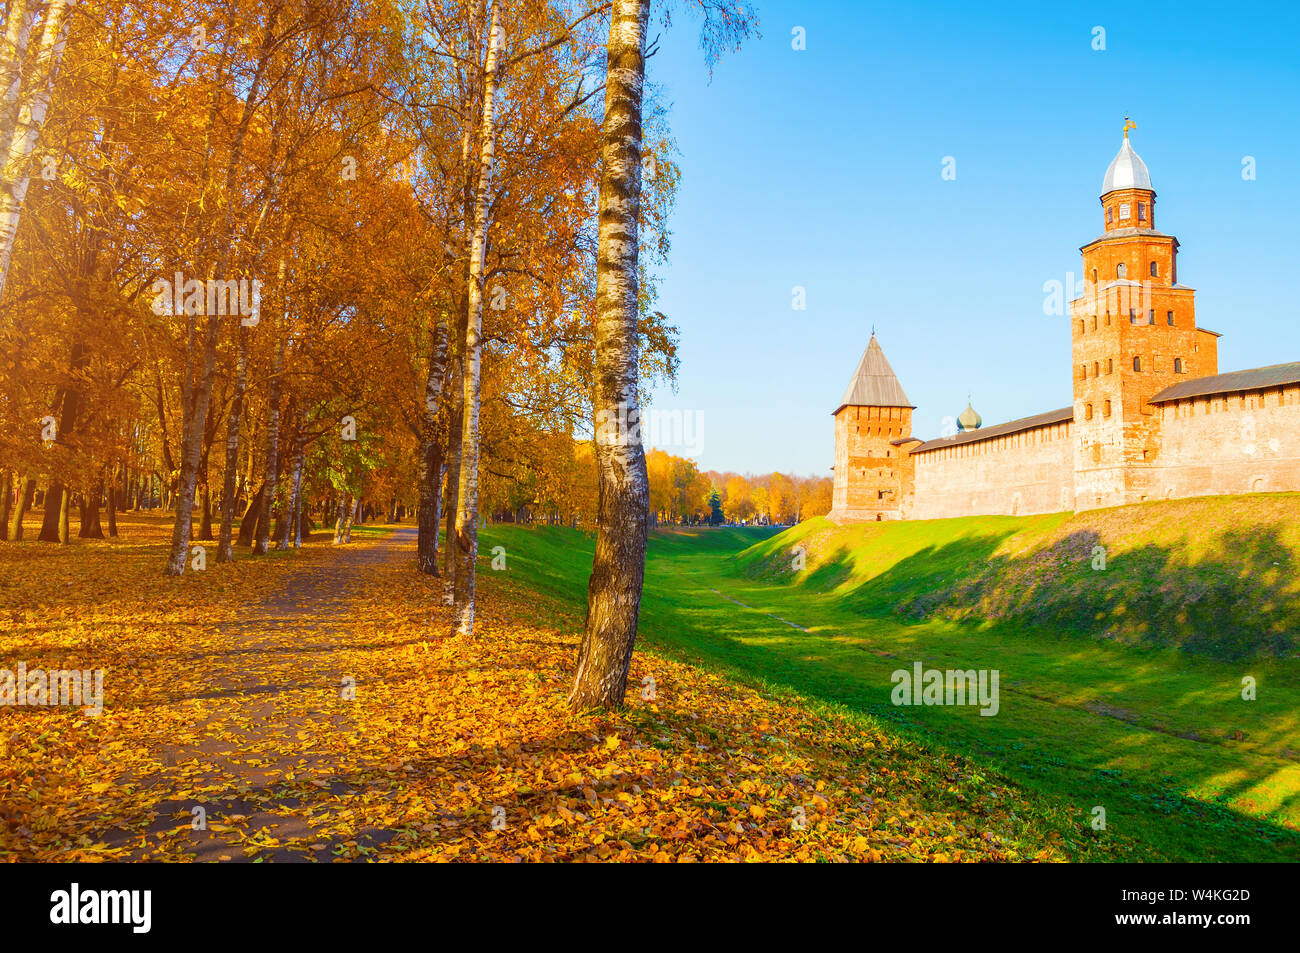 Veliky Novgorod, Russia. Kokui and Prince towers of Veliky Novgorod Kremlin fortress in sunny autumn afternoon. Focus at the fortress, autumn city lan Stock Photo